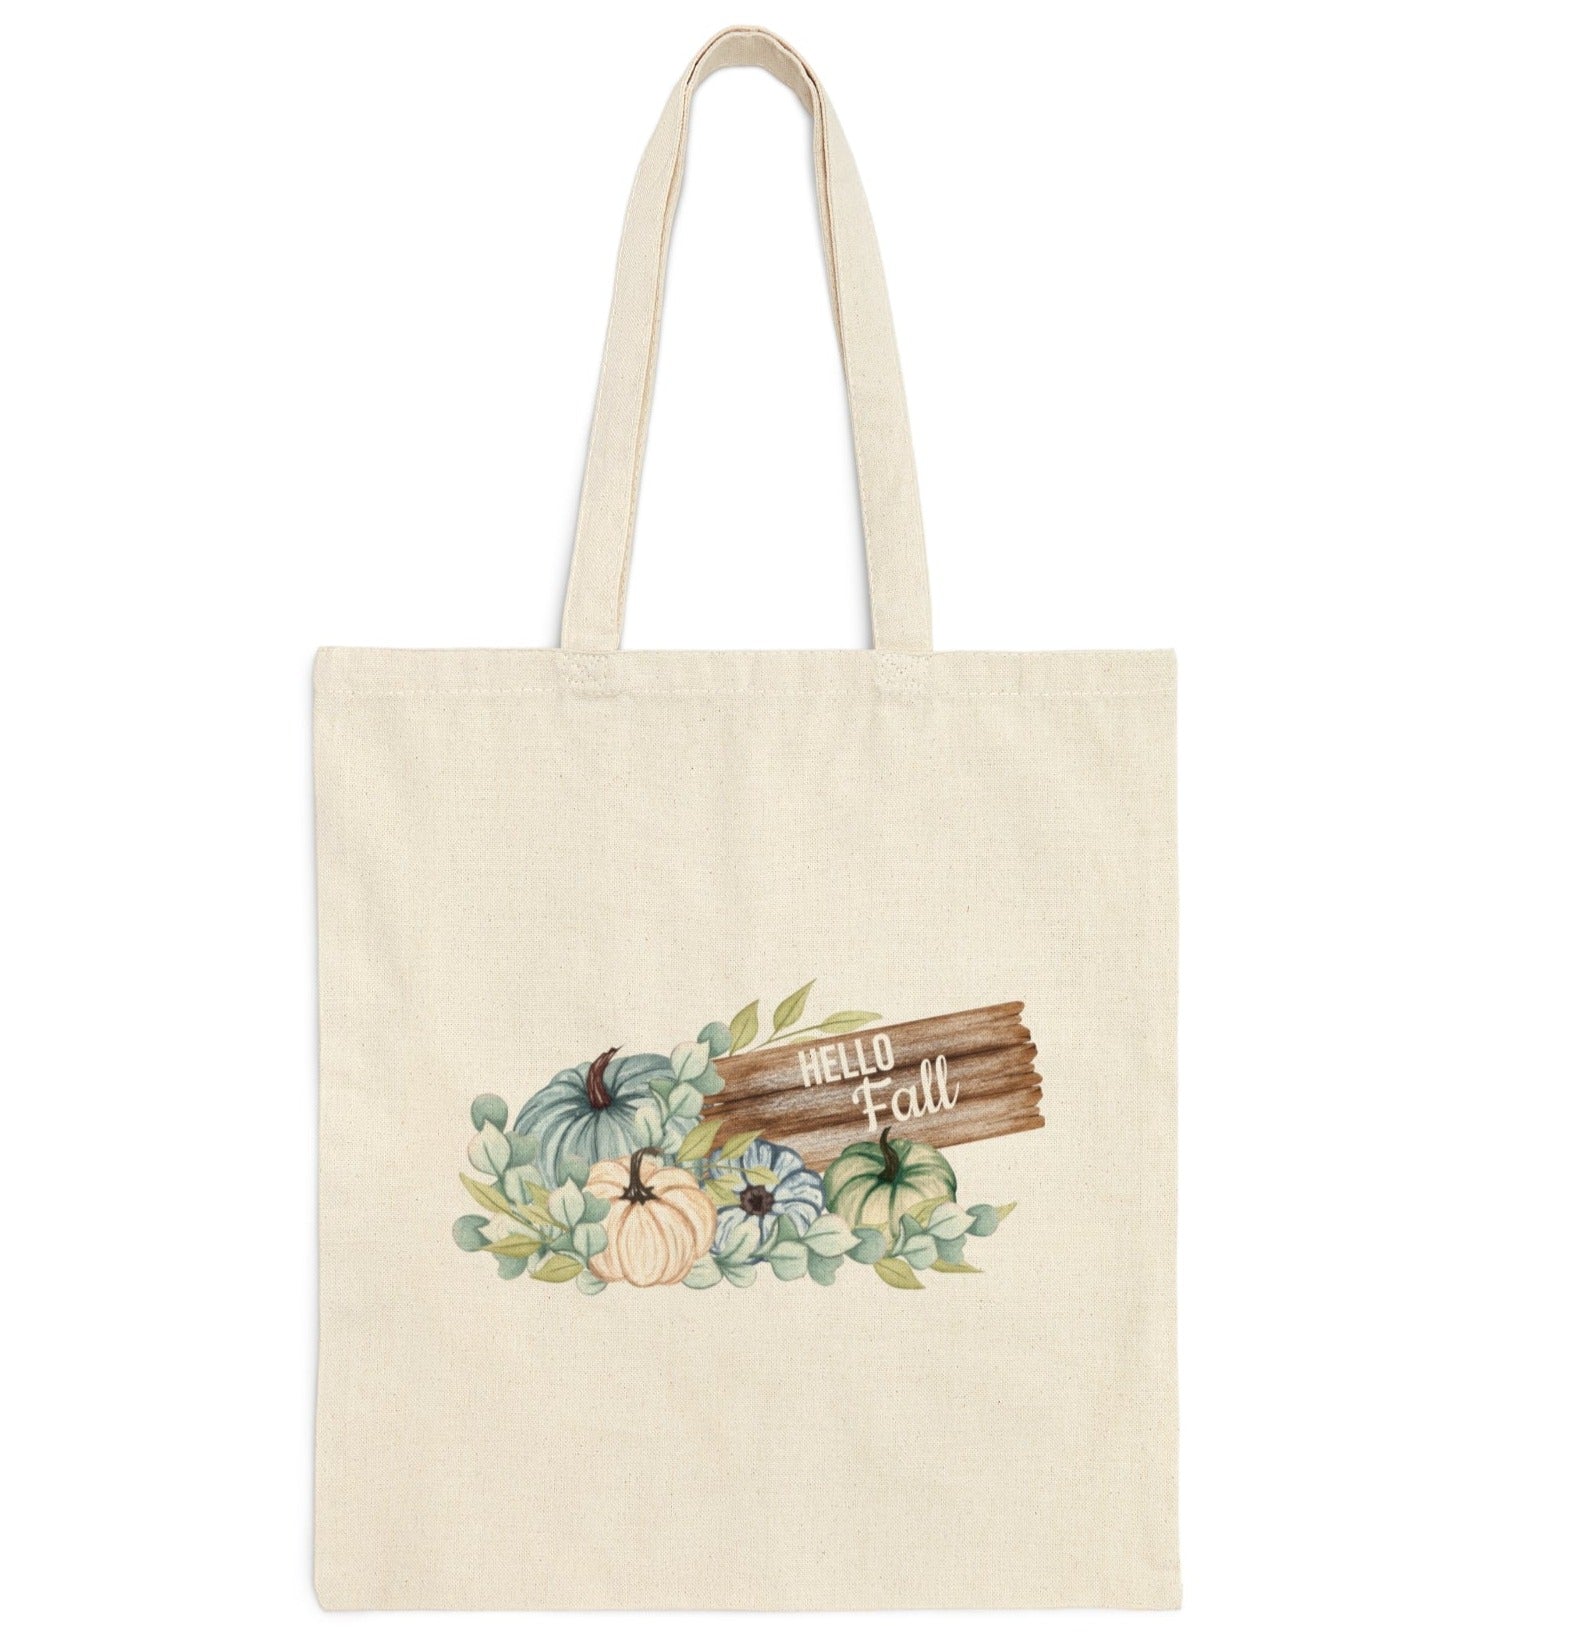 hello fall tote back with blue pumpkin and leaf print